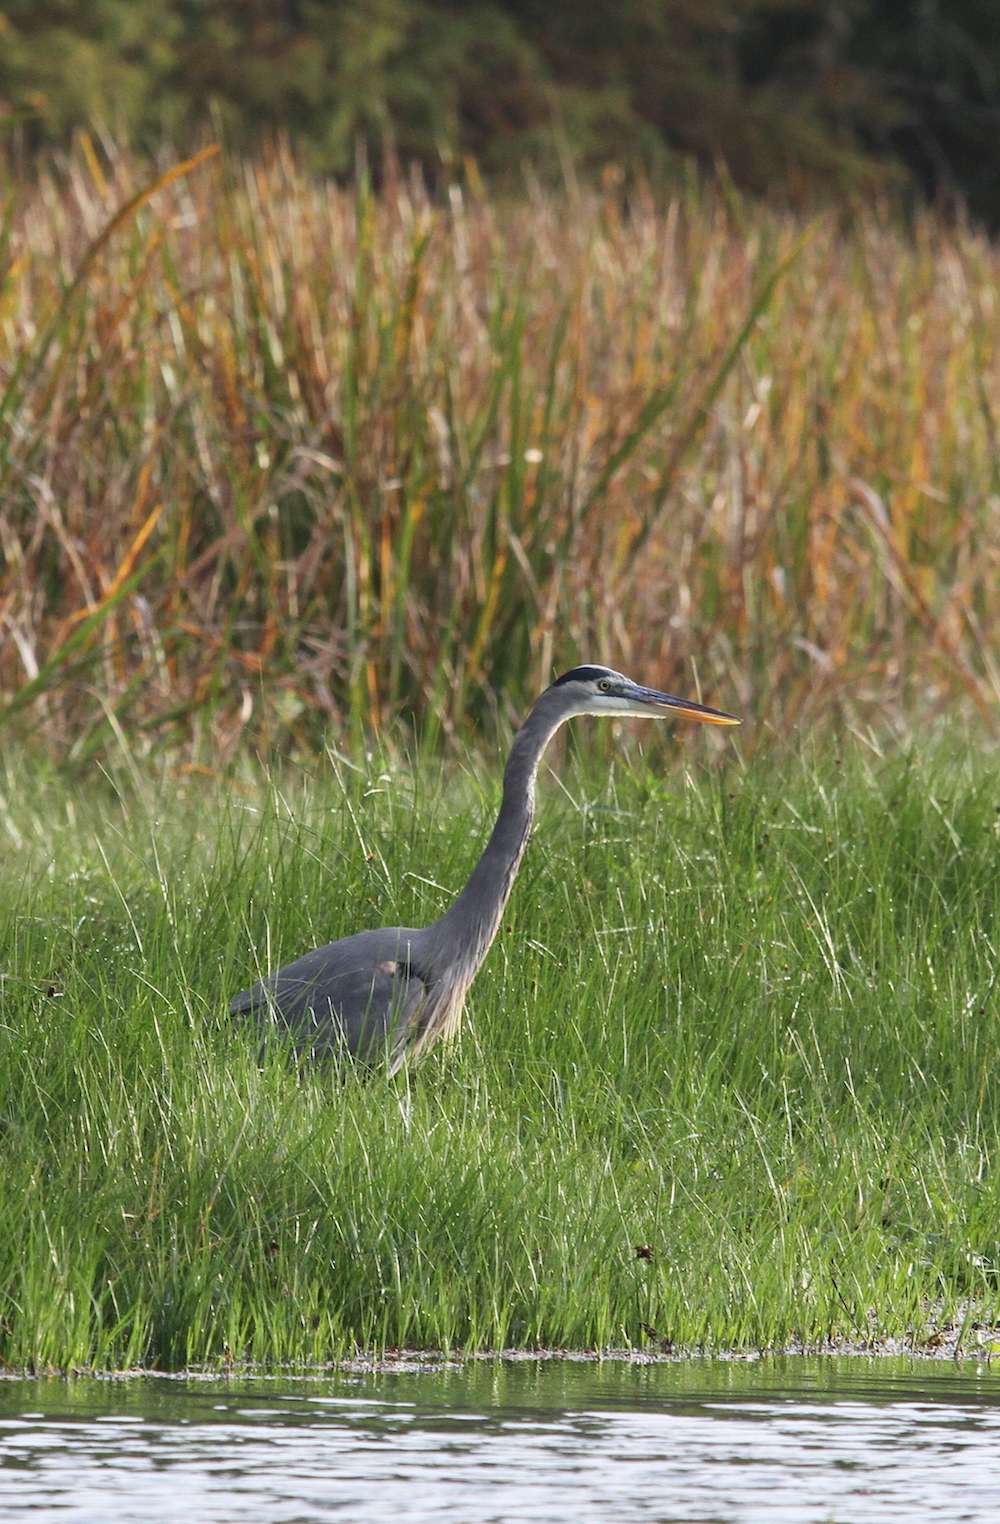 This blue heron has setup shop in the grass. 